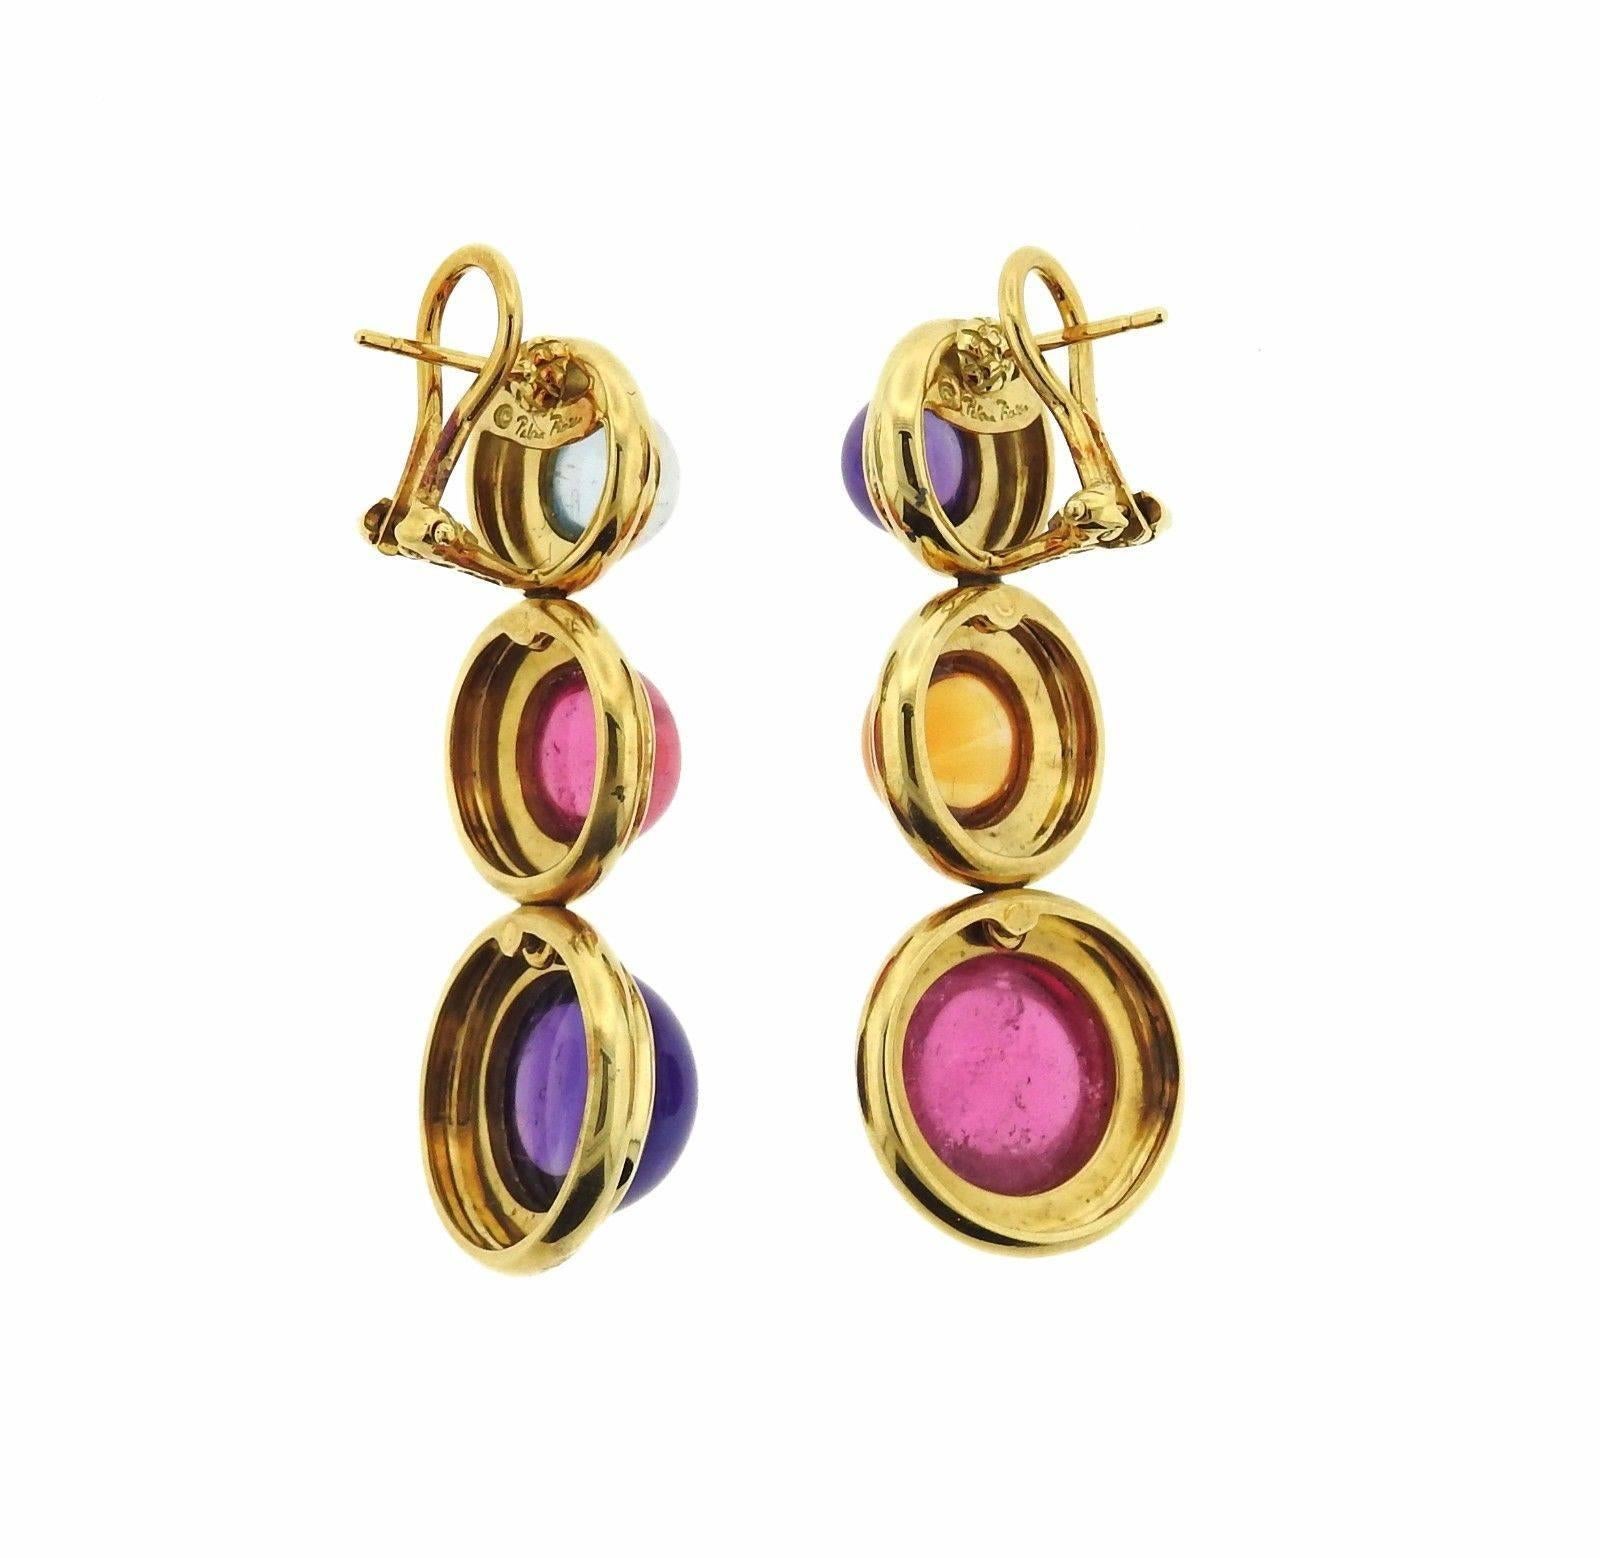 A pair of 18k yellow gold earrings set with amethyst, citrine, pink tourmaline and aquamarine.  The earrings measure 18mm x 46mm and weigh 26.7 grams.  Marked: T&Co, Paloma Picasso.